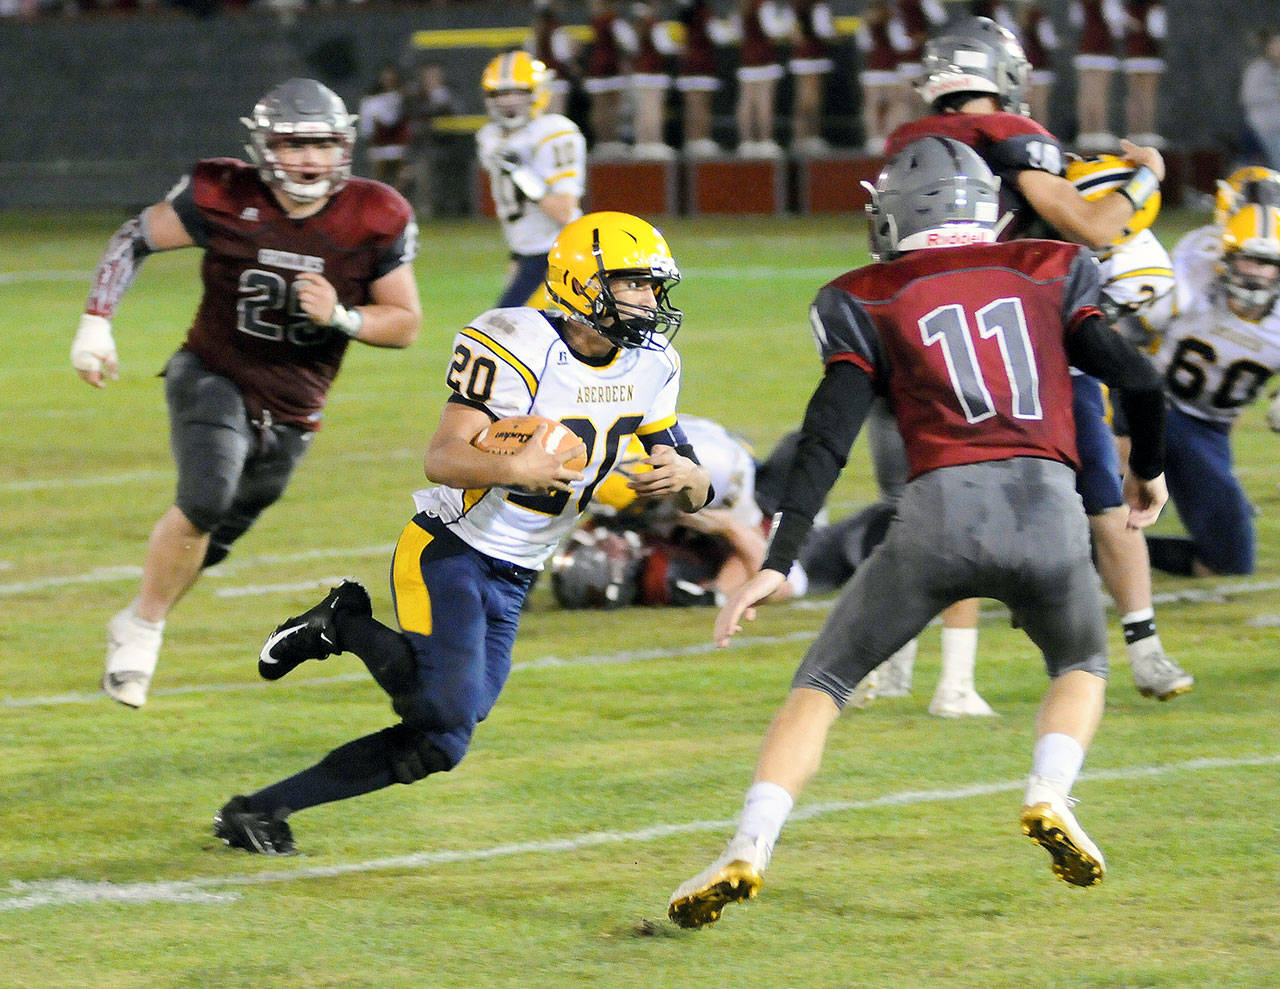 Daily World File Photo                                 Aberdeen’s Ethan Morrill (20) carries the football against Hoquiam during the 114th Myrtle Street Rivalry game on Sept. 13, 2019. The two schools will re-ignite the state’s longest-running rivalry game on March 12 in Aberdeen.